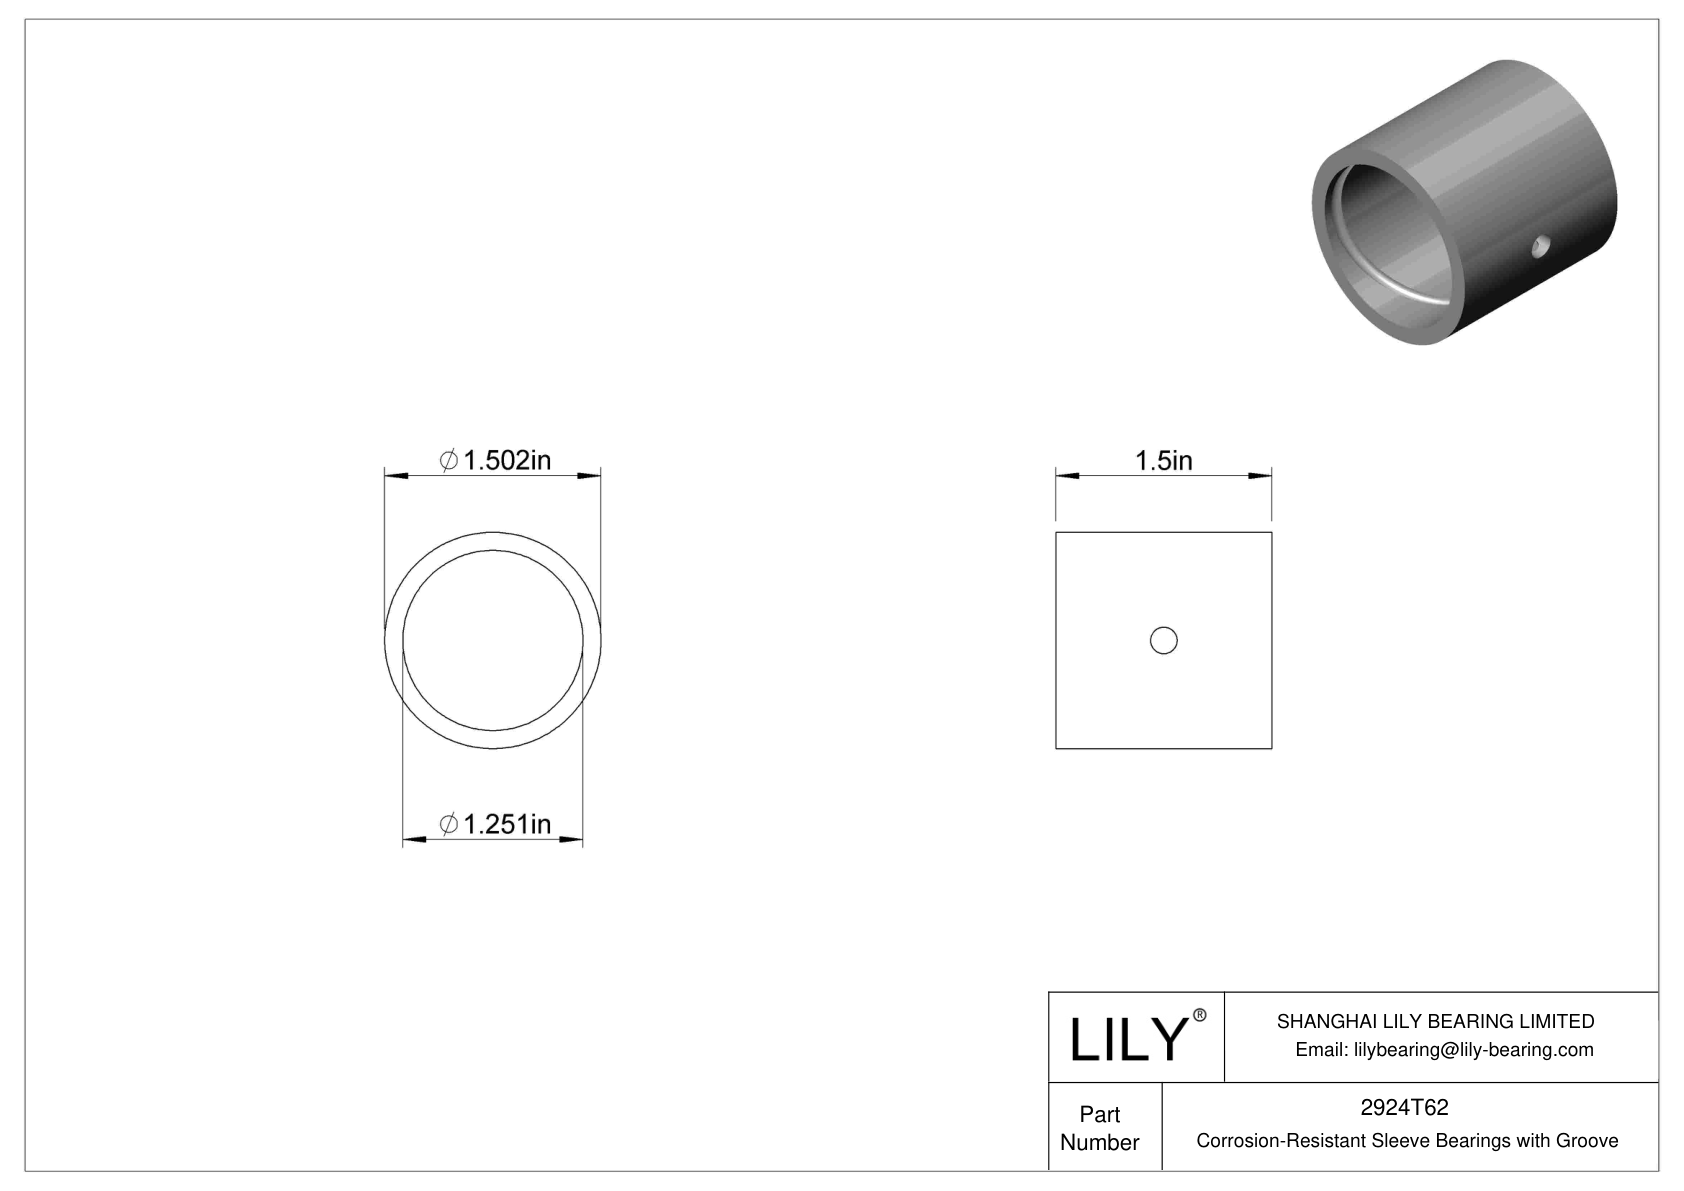 CJCETGC Corrosion-Resistant Sleeve Bearings with Groove cad drawing